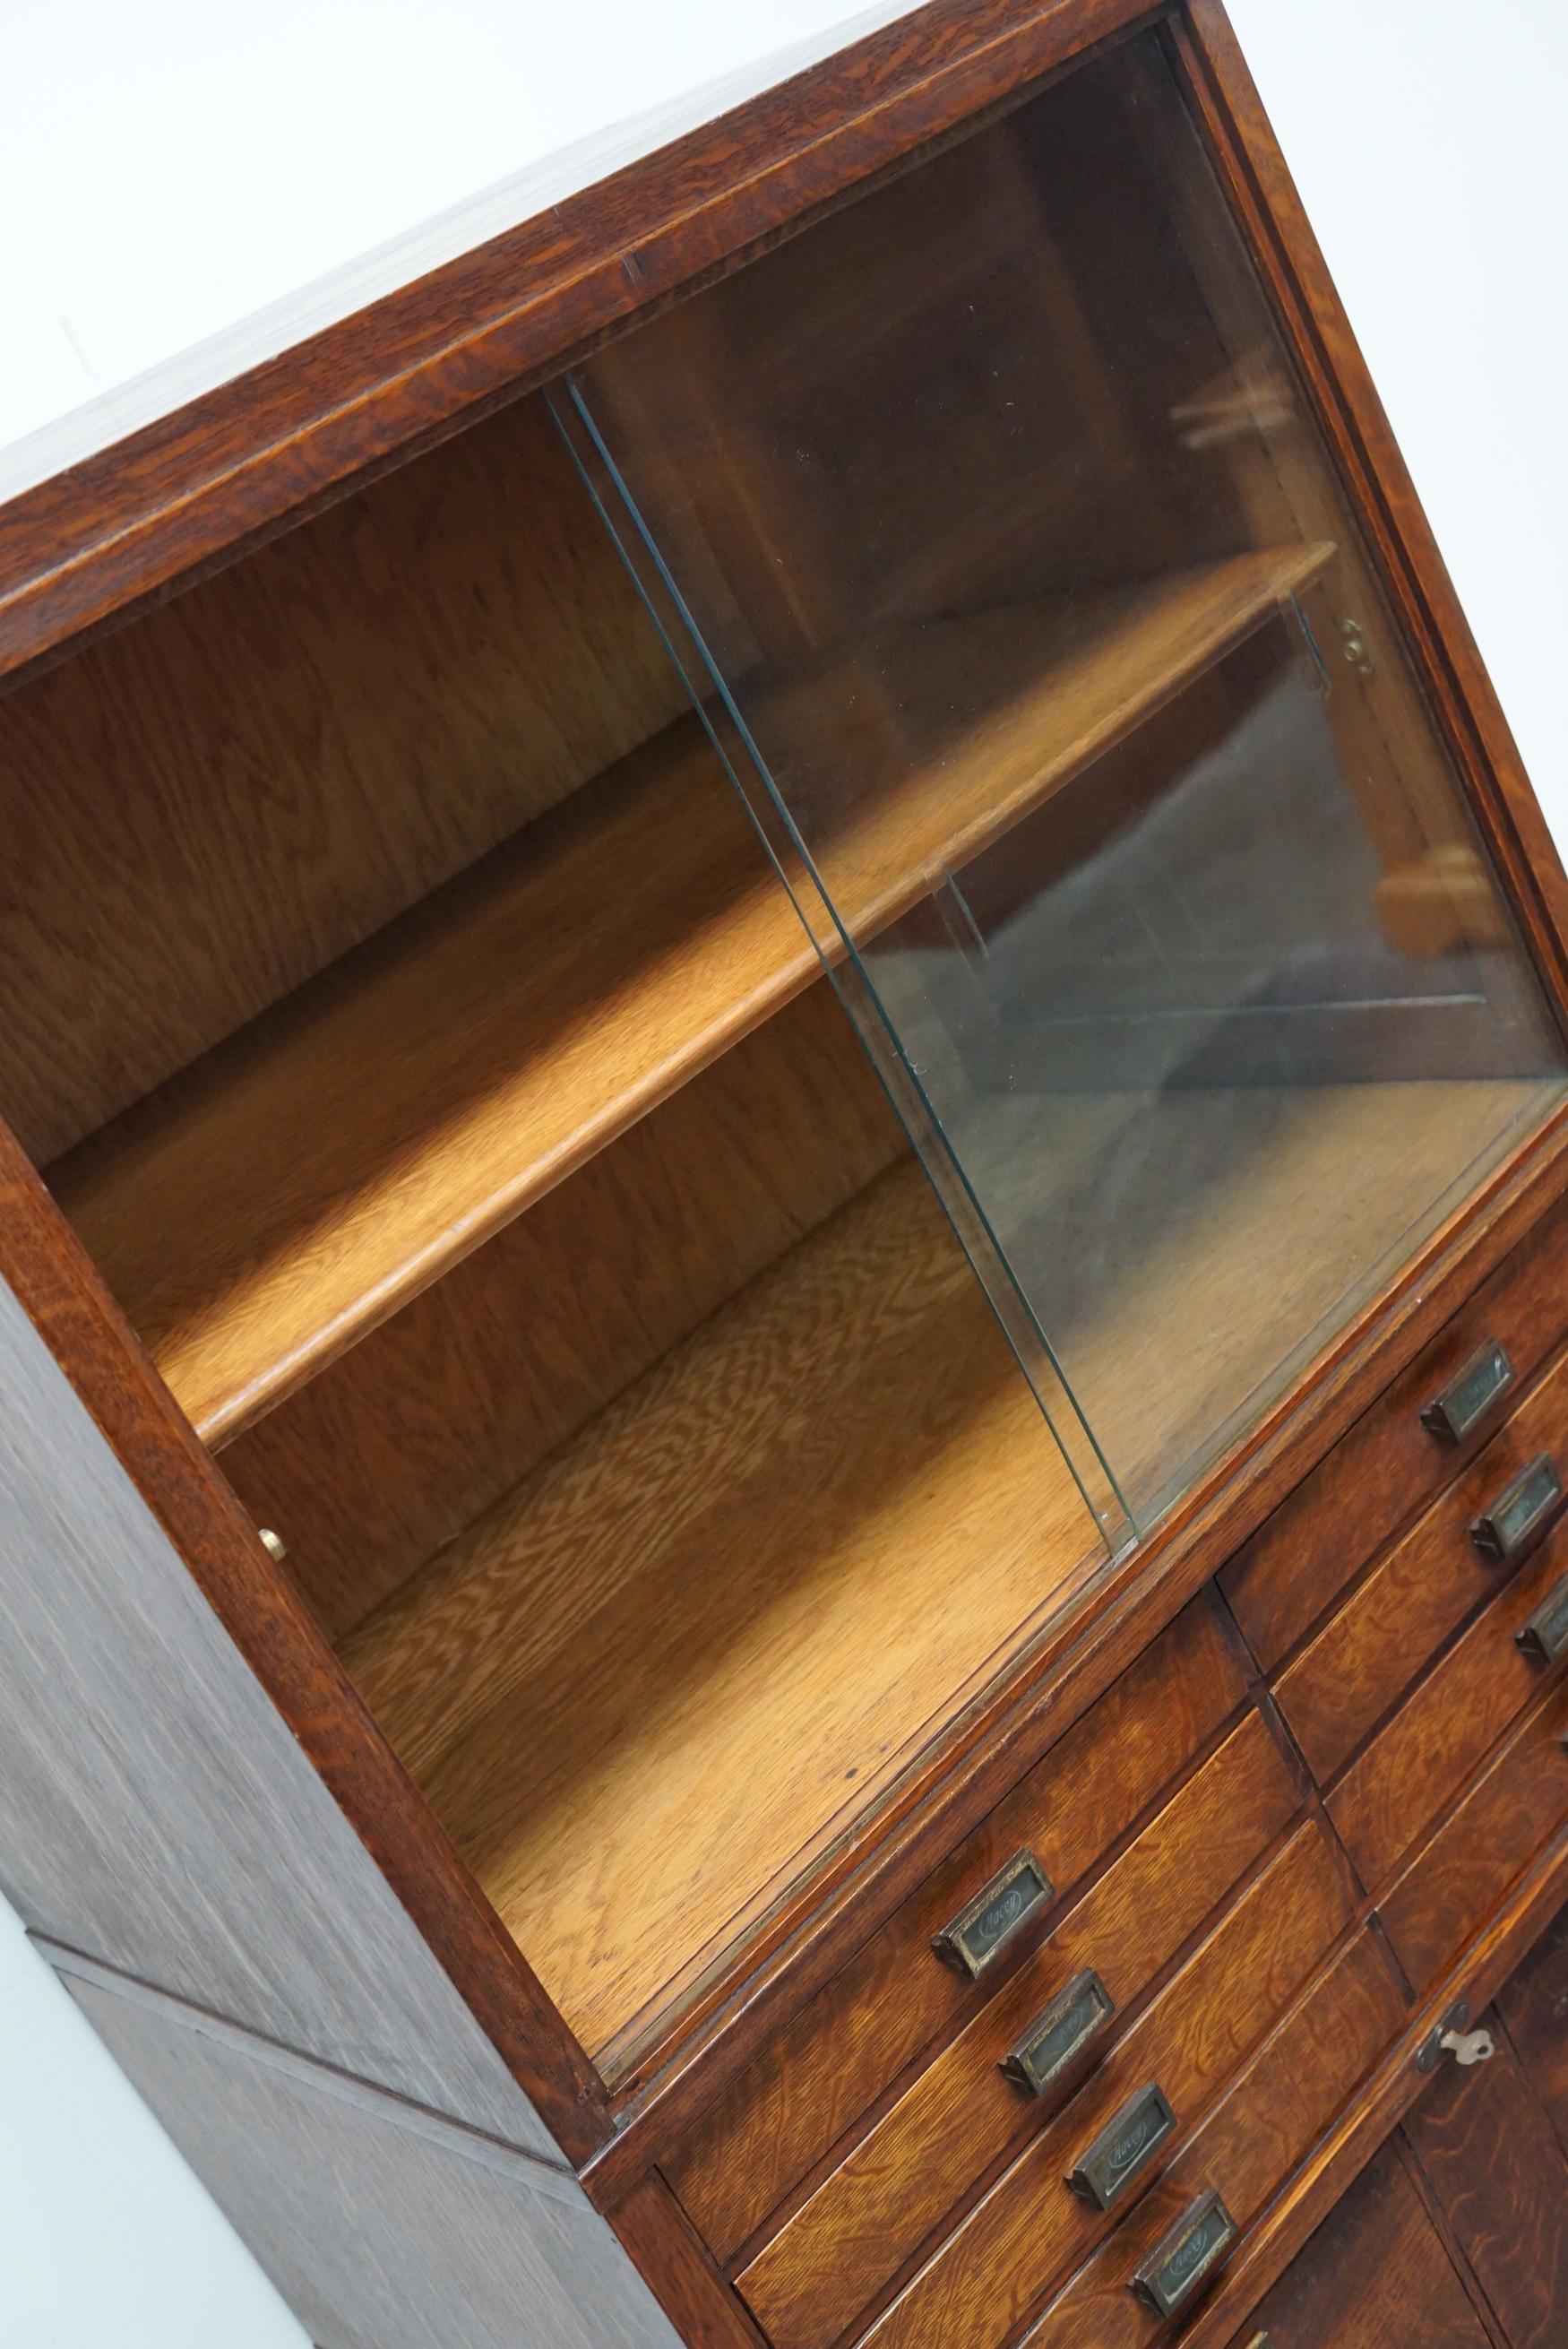 This bookcase / filing cabinet was produced by Macey in the US around 1920. It features stackable compartments with two glass sliding doors in the top section and drawers in the bottom. The interior dimensions of the drawers are: DWH 44 x 36 x 5 cm